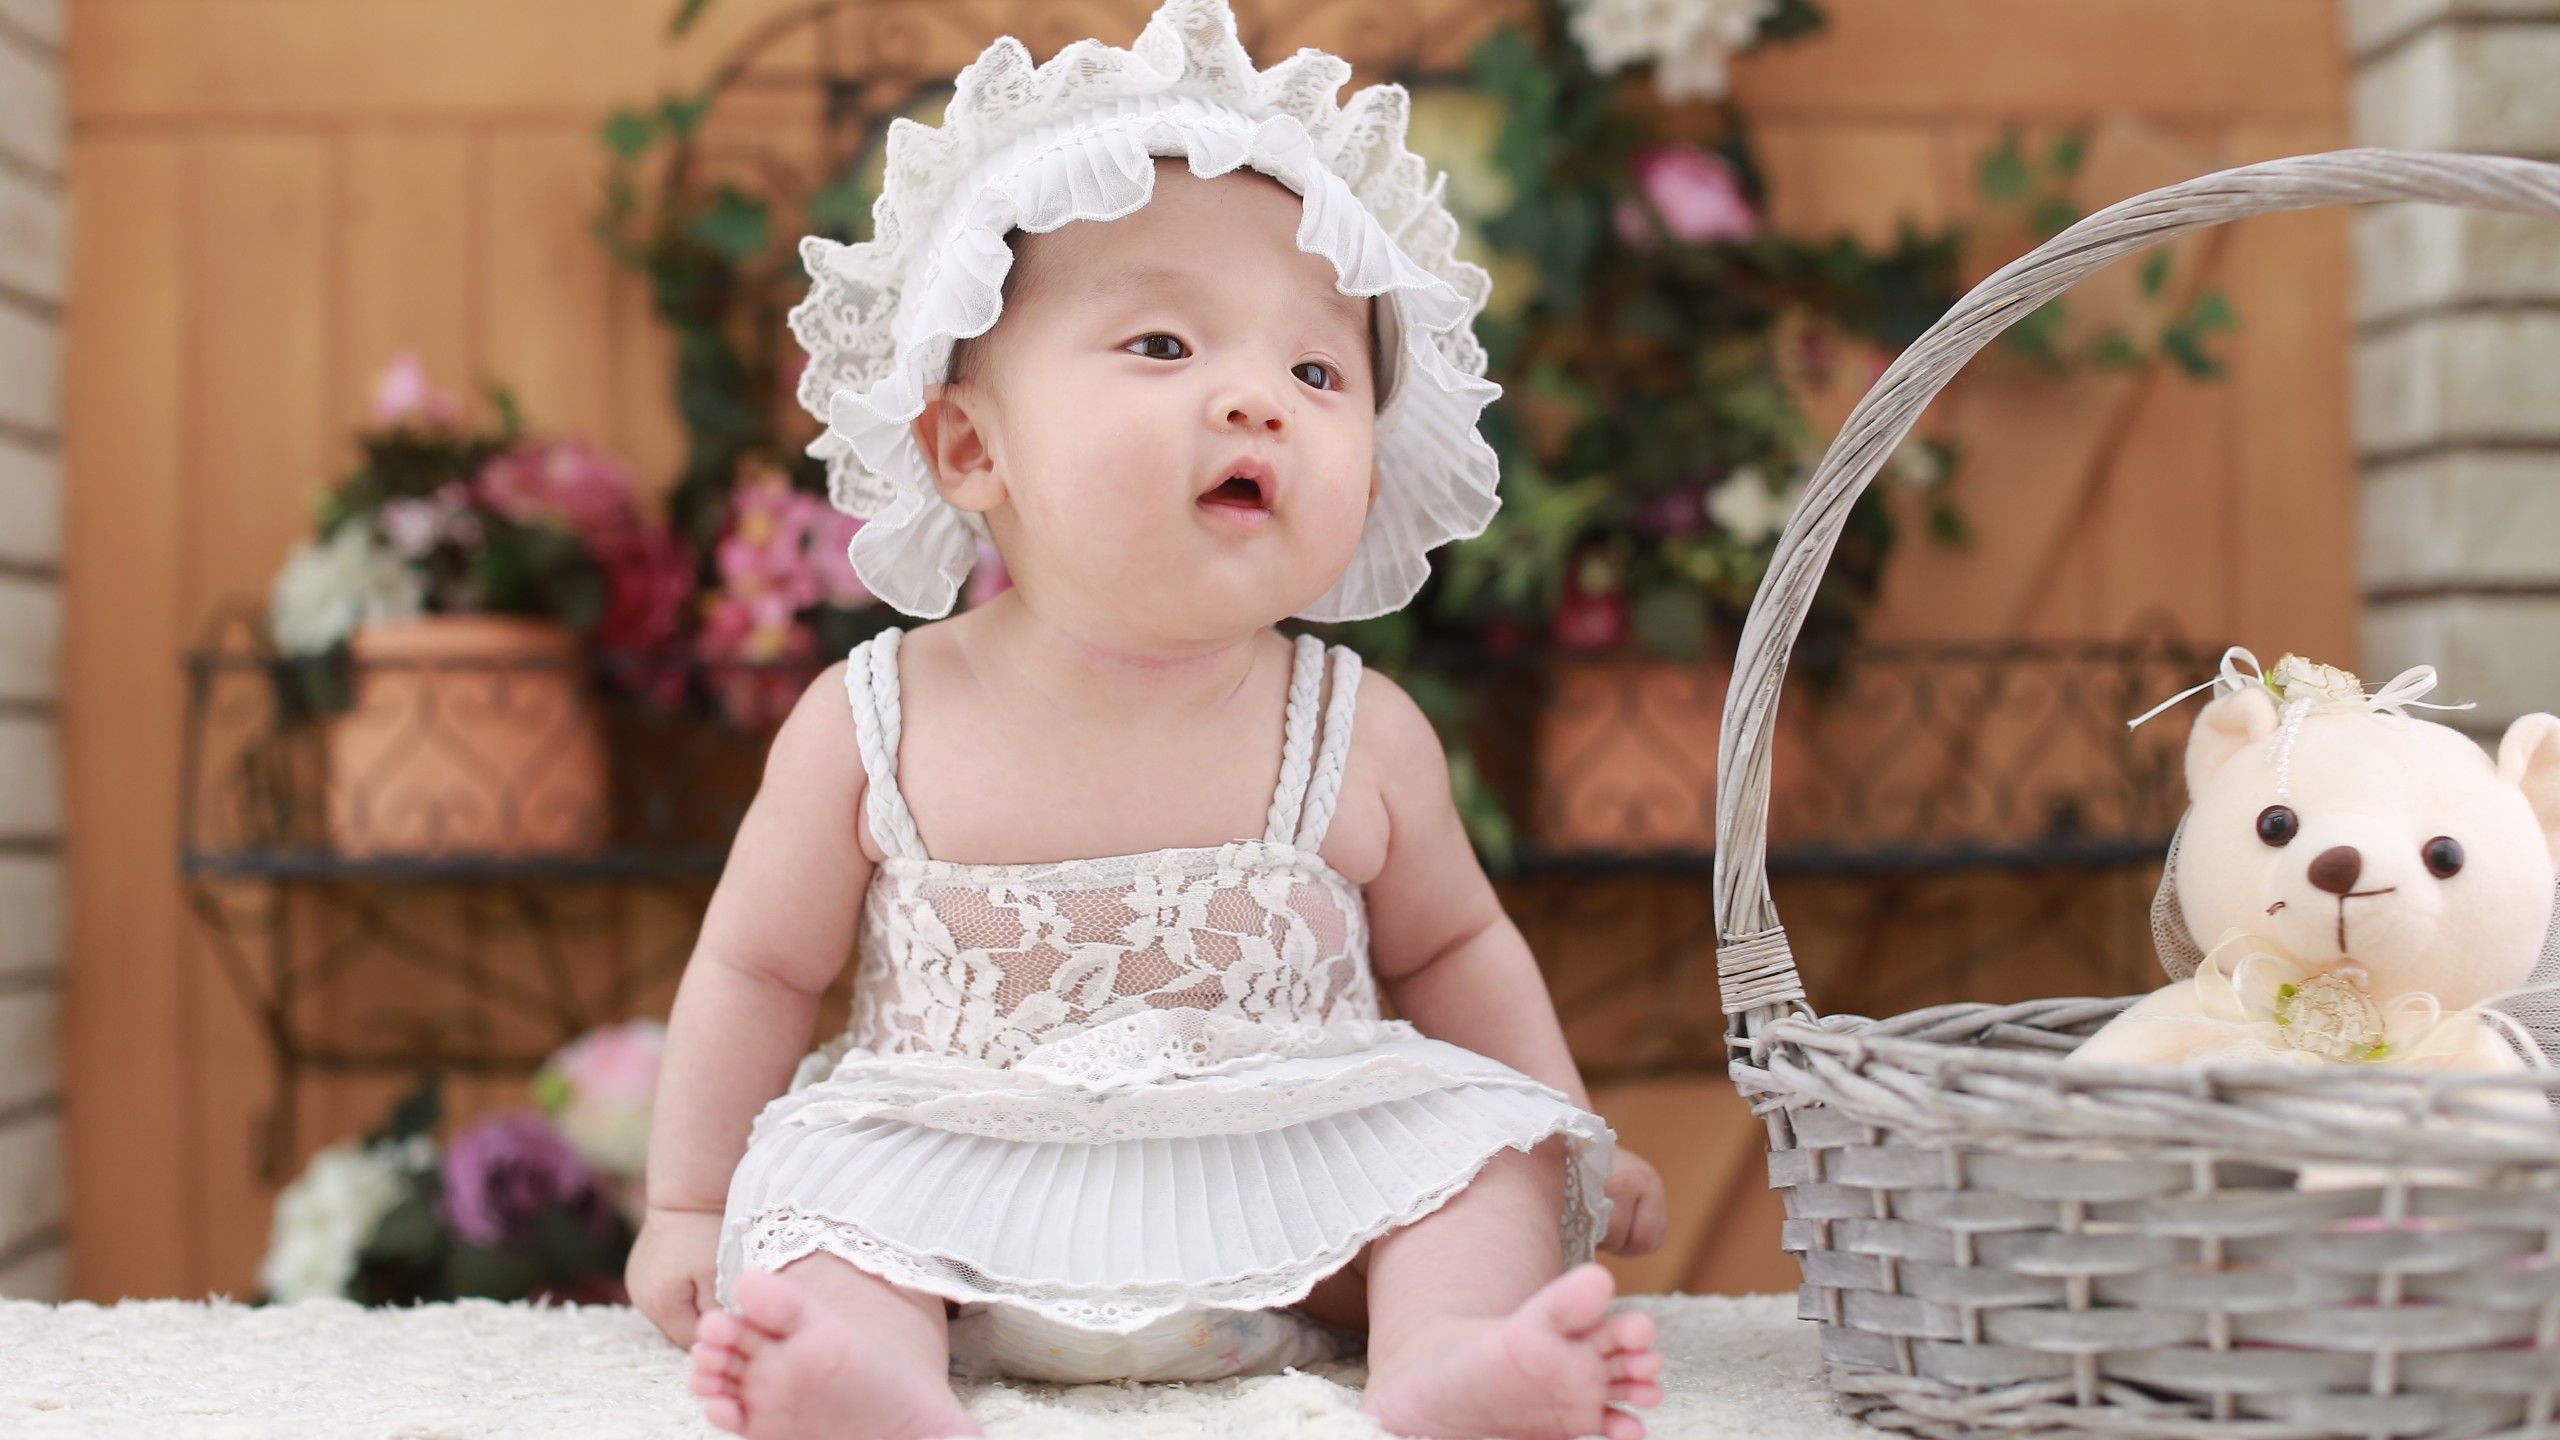 Cute Baby HD Wallpaper For Mobile Baby Image Download Wallpaper & Background Download